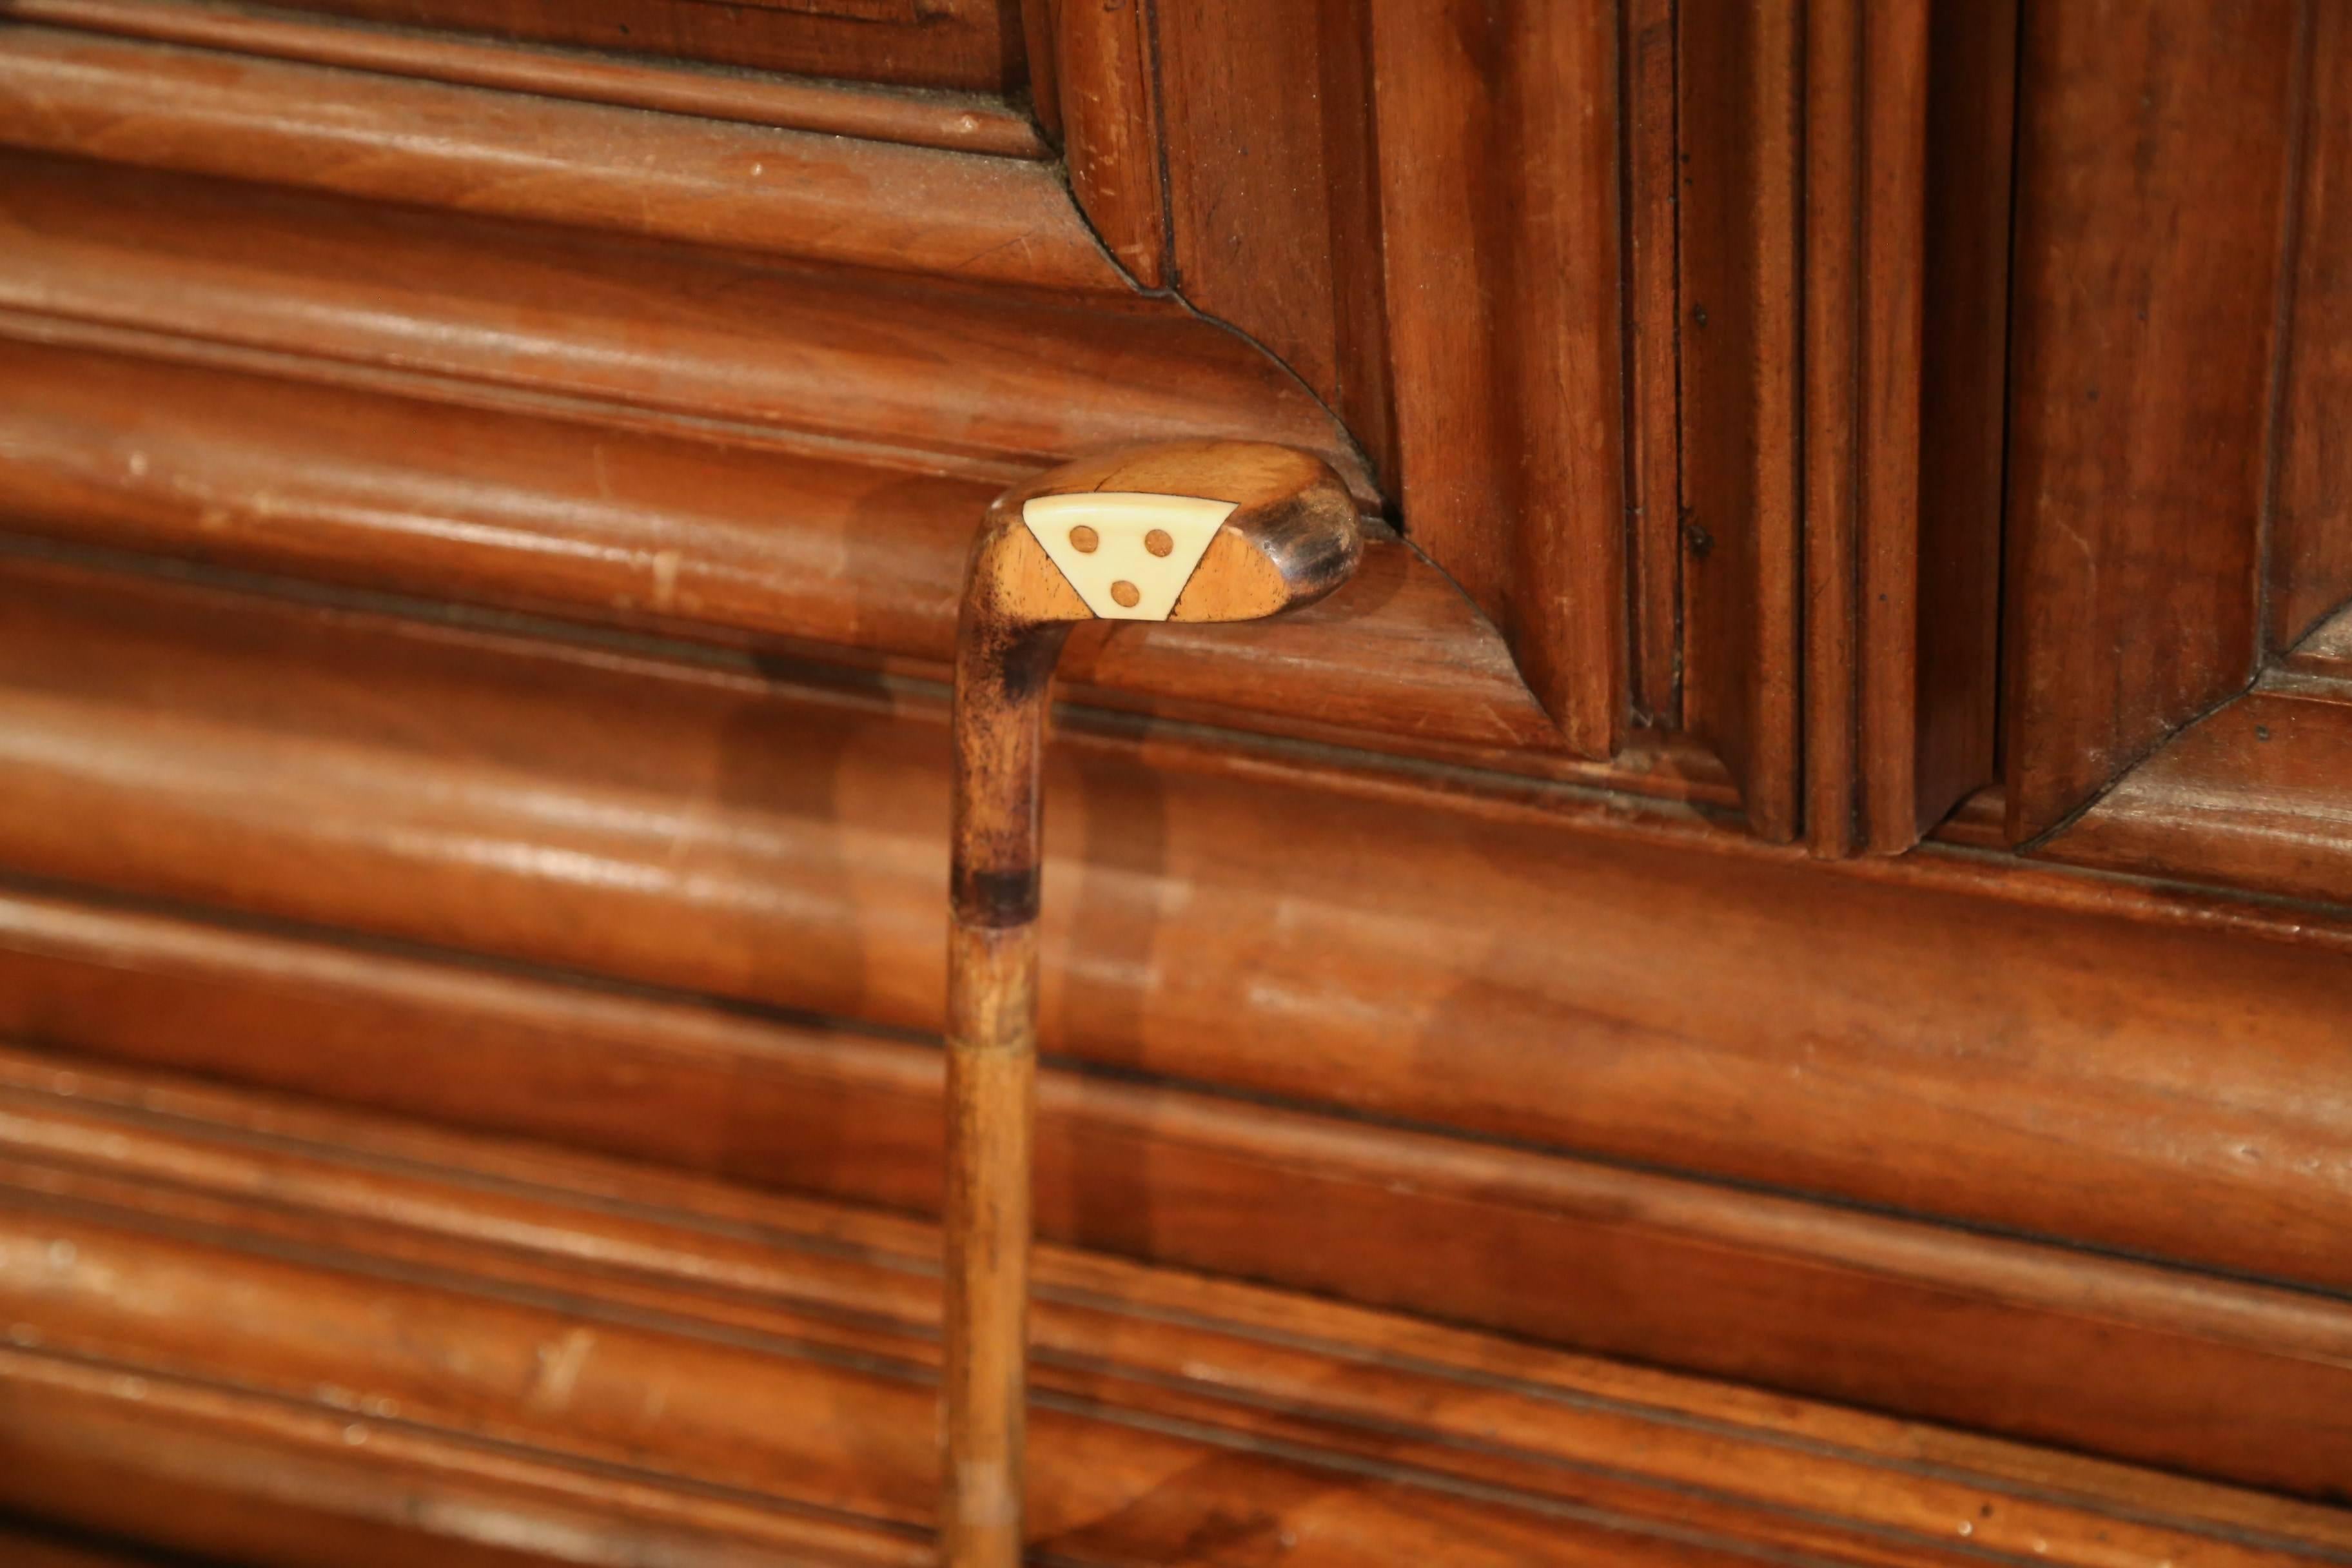 Hand-Carved Early 20th Century English Wooden Golf Club Walking Stick or “Sunday Cane”